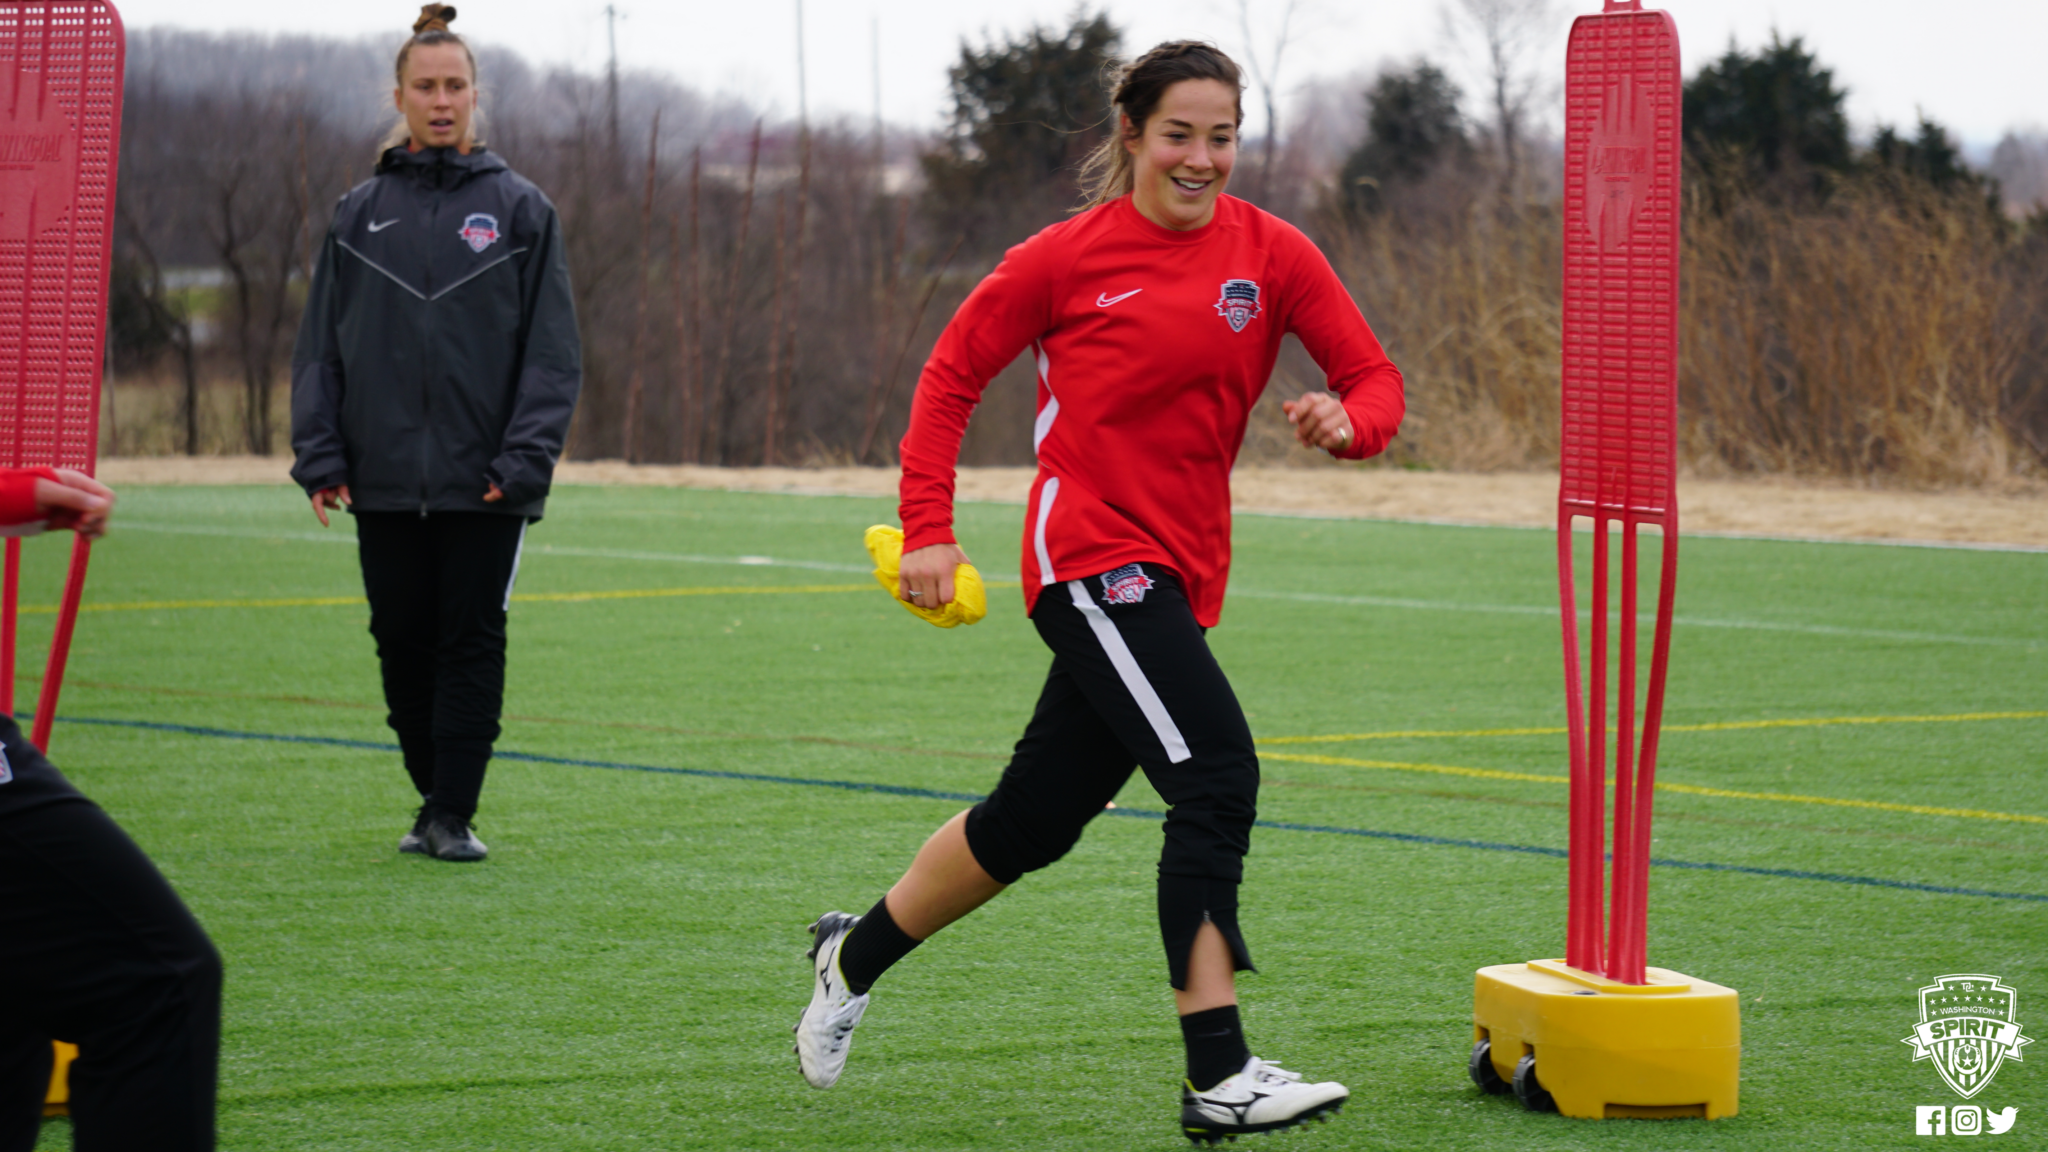 Paige Nielsen is ready to start competing in the NWSL after playing overseas Featured Image